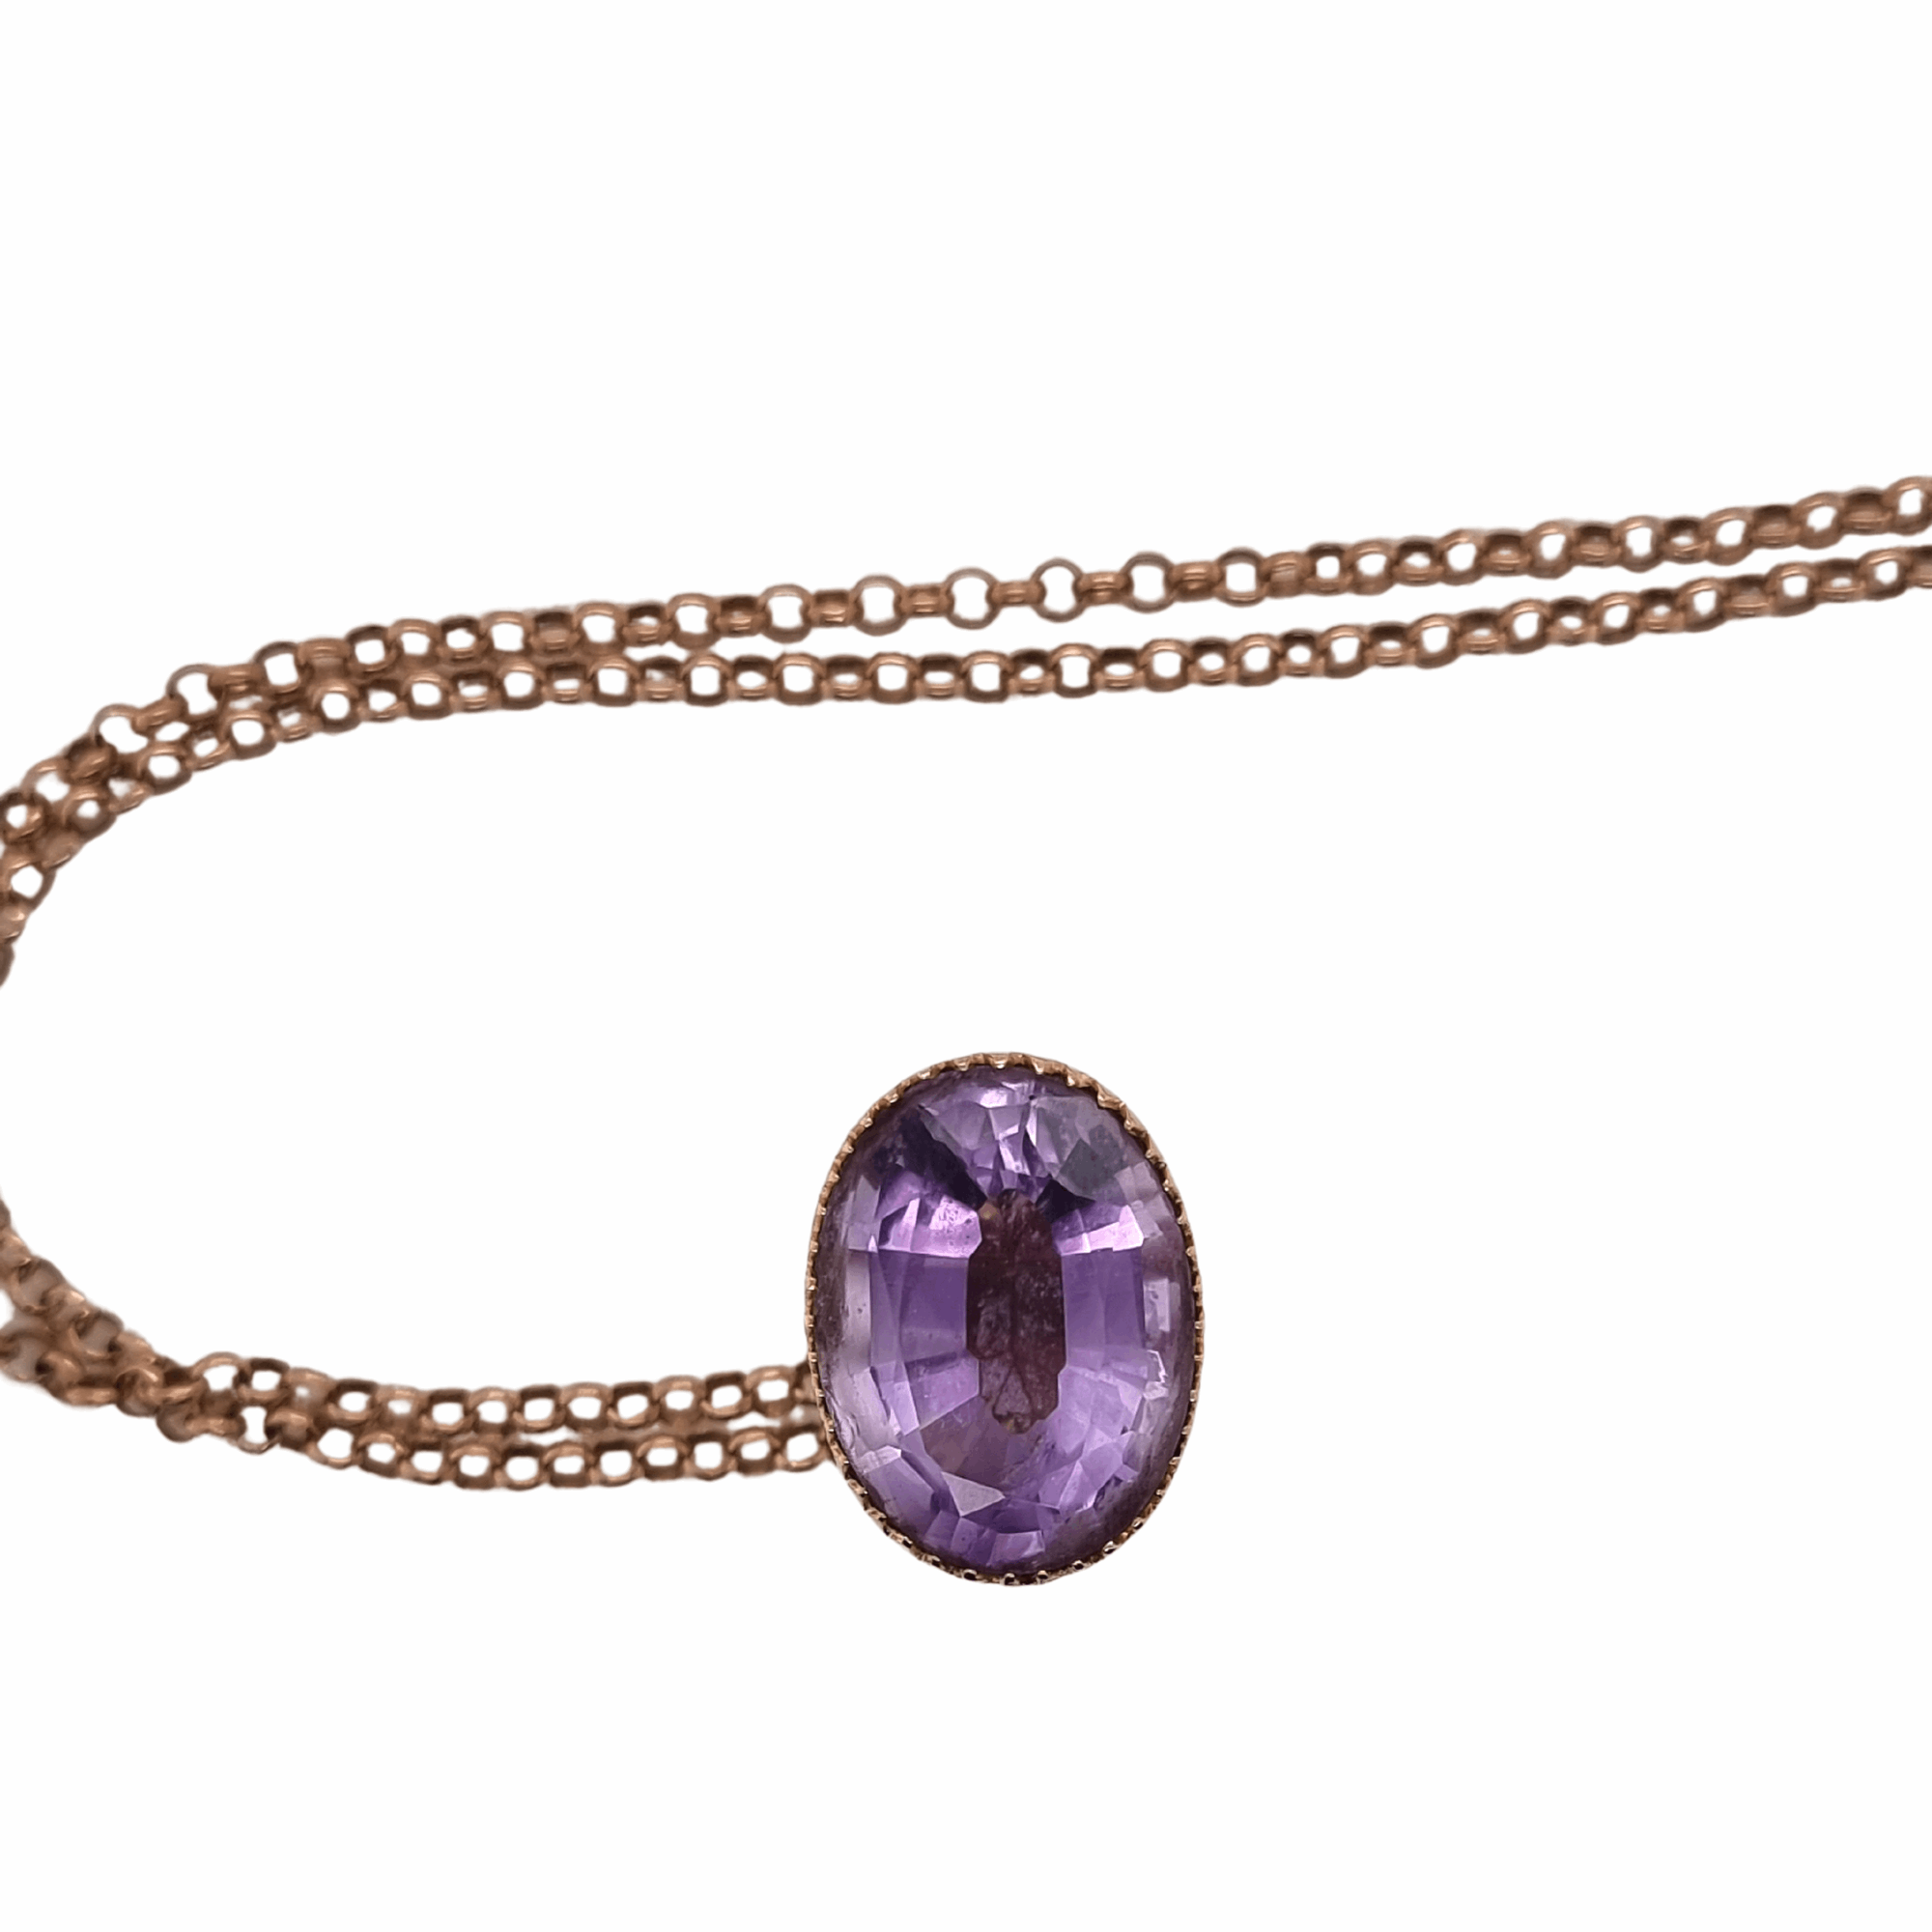 9ct Rose Gold Amethyst Fob Necklace